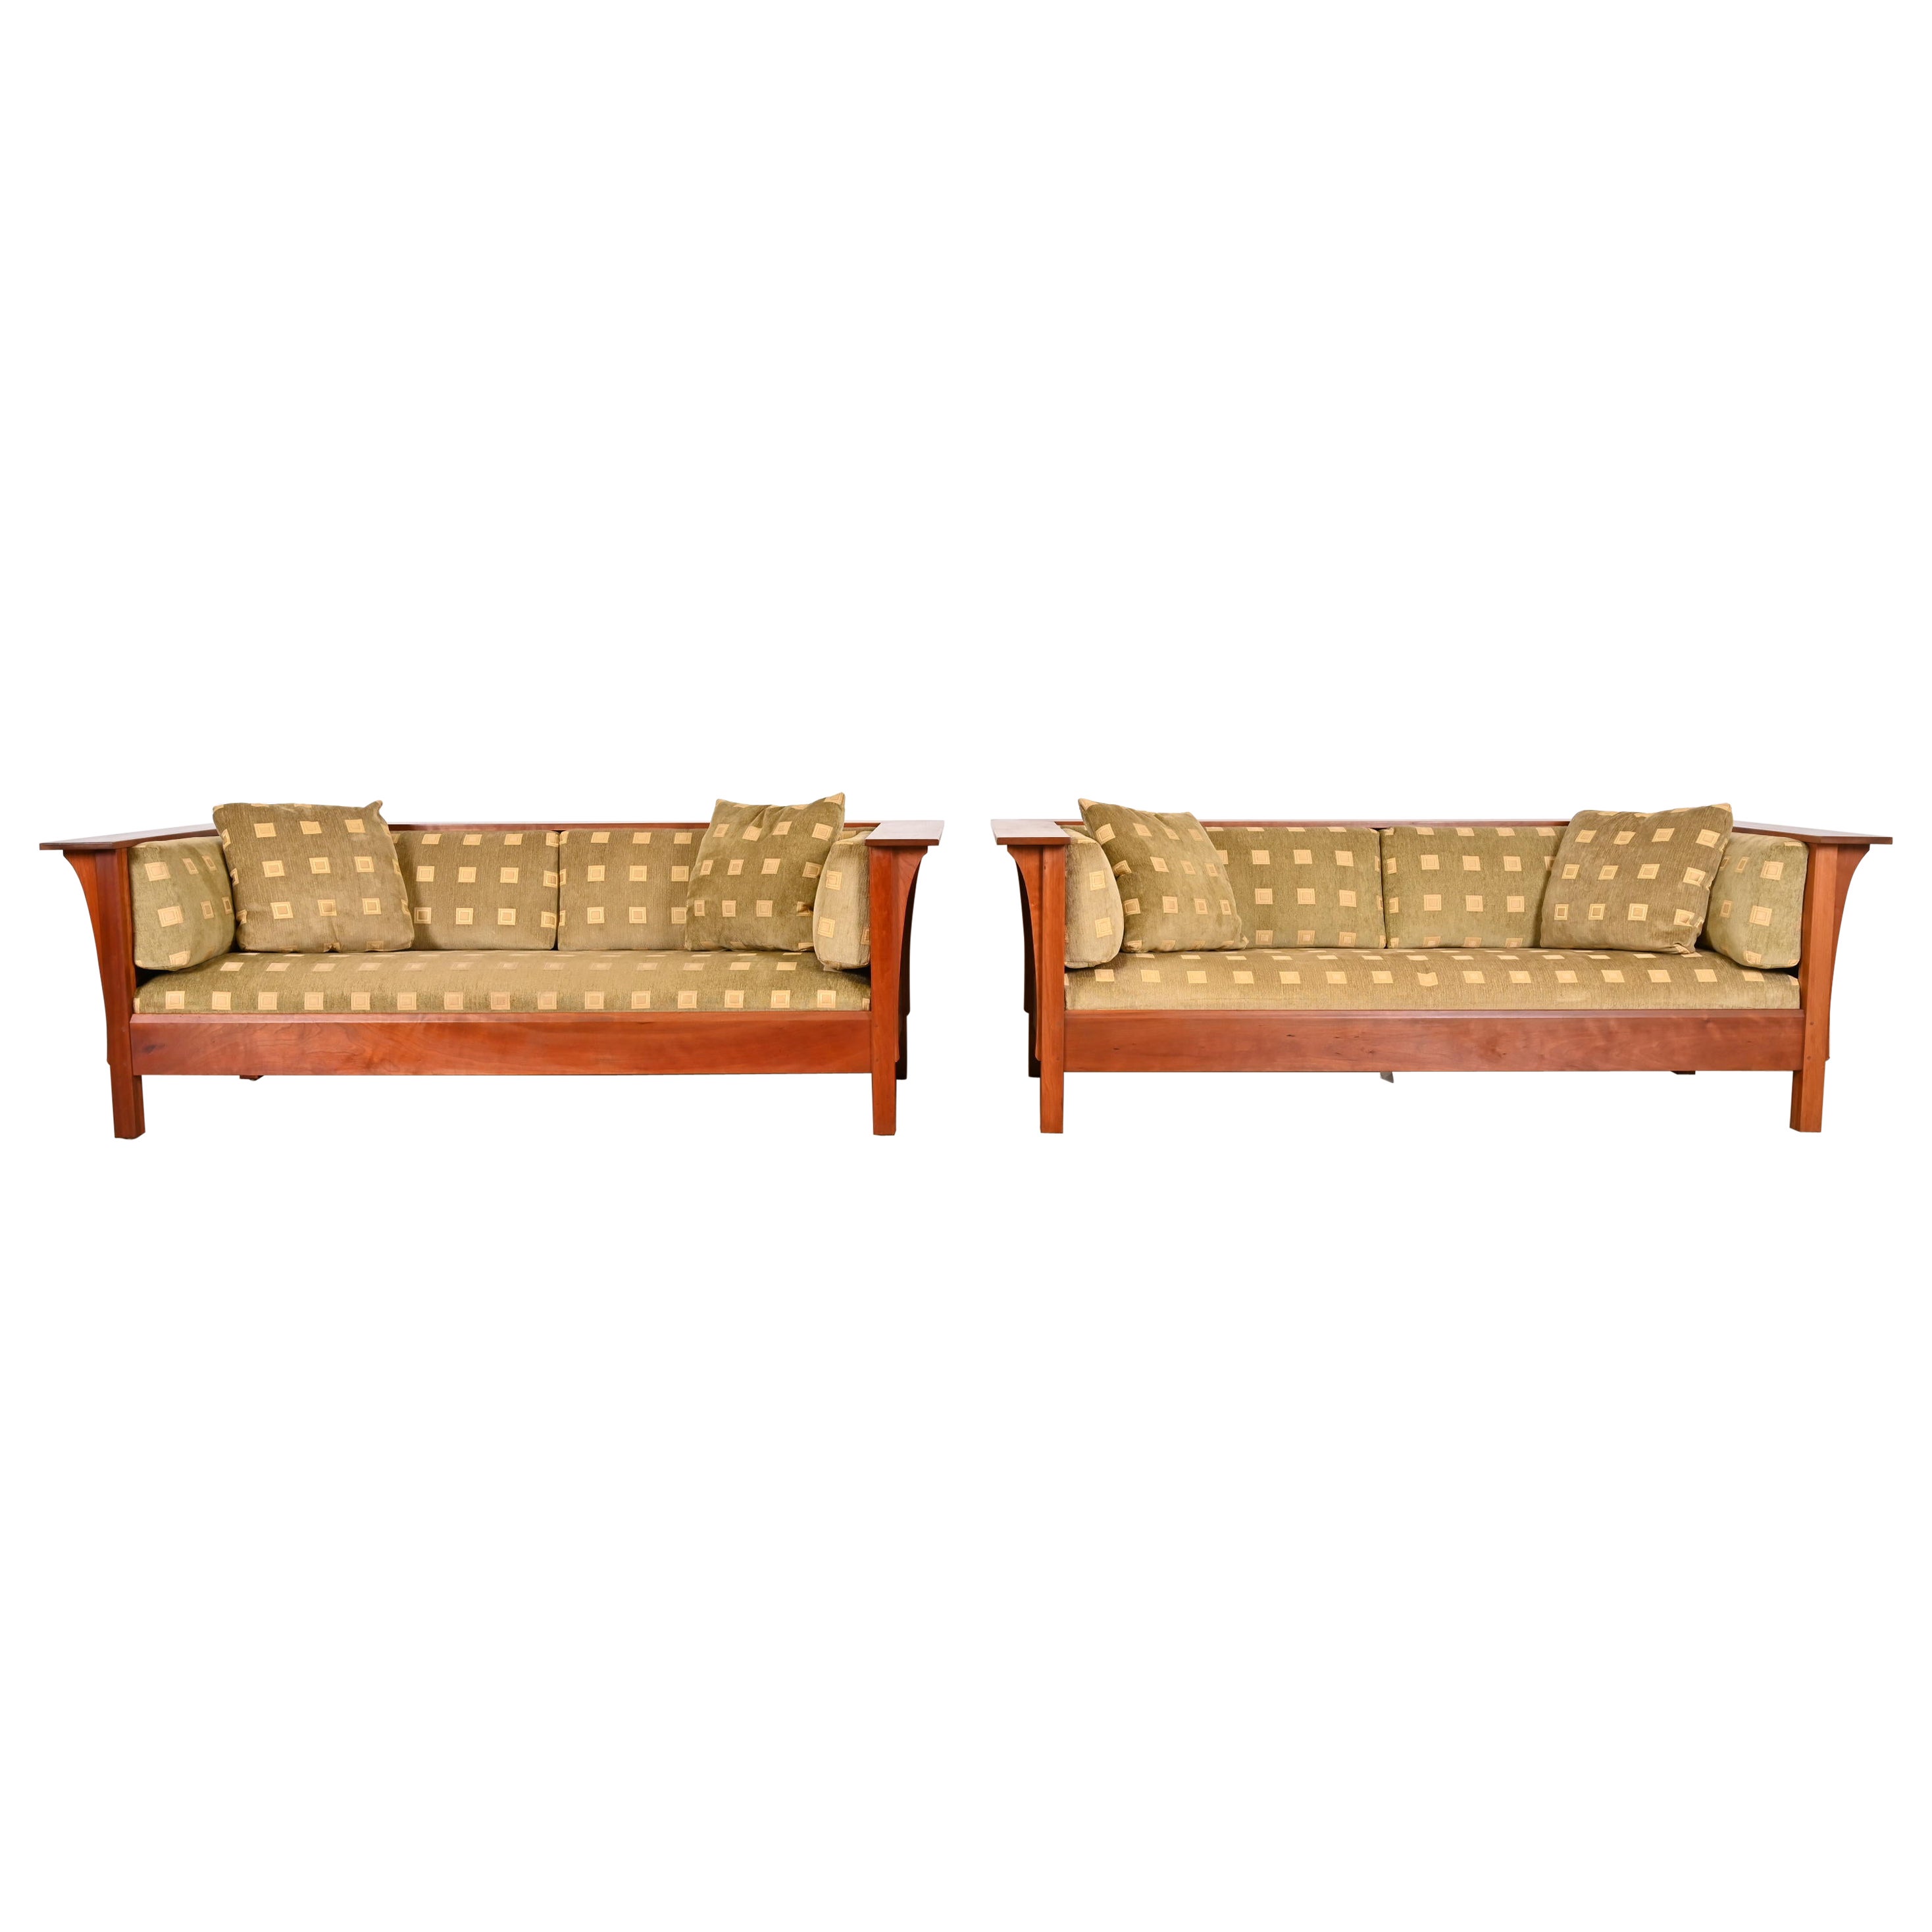 Stickley Mission Arts and Crafts Cherry Wood Settle Sofas, Pair For Sale